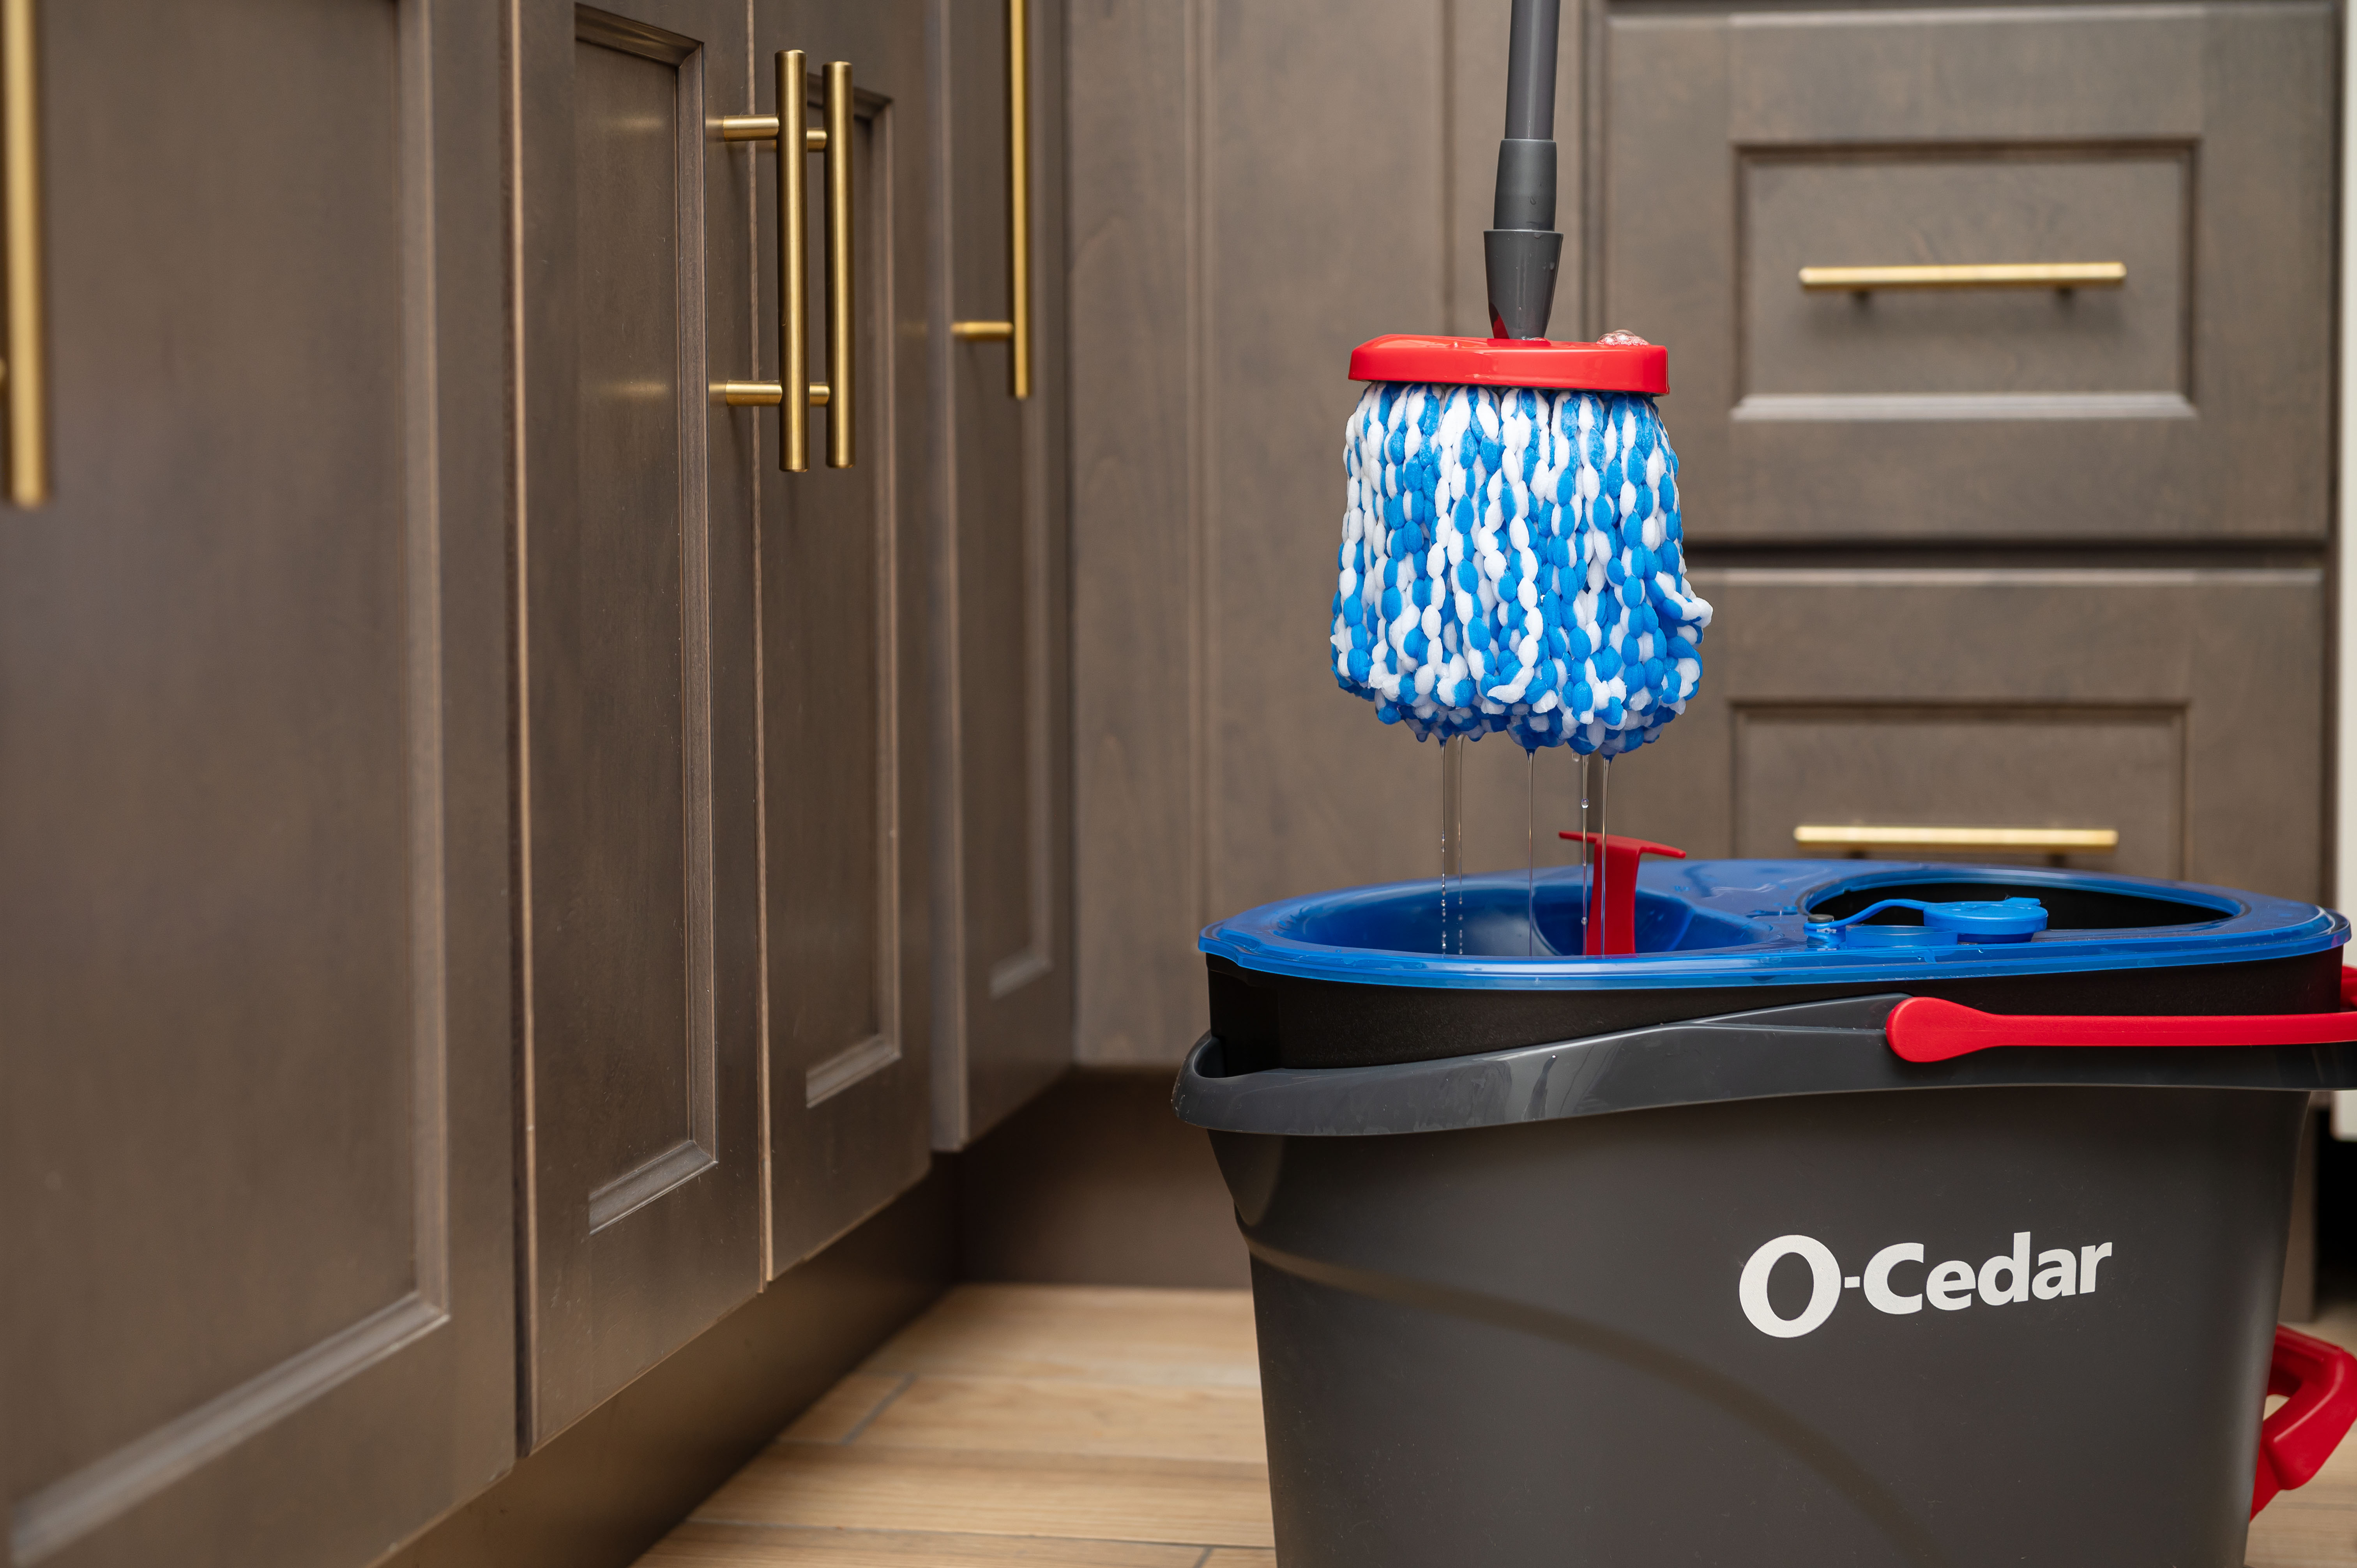 O-Cedar EasyWring RinseClean Spin Mop and Bucket System, Hands-Free System - image 13 of 25